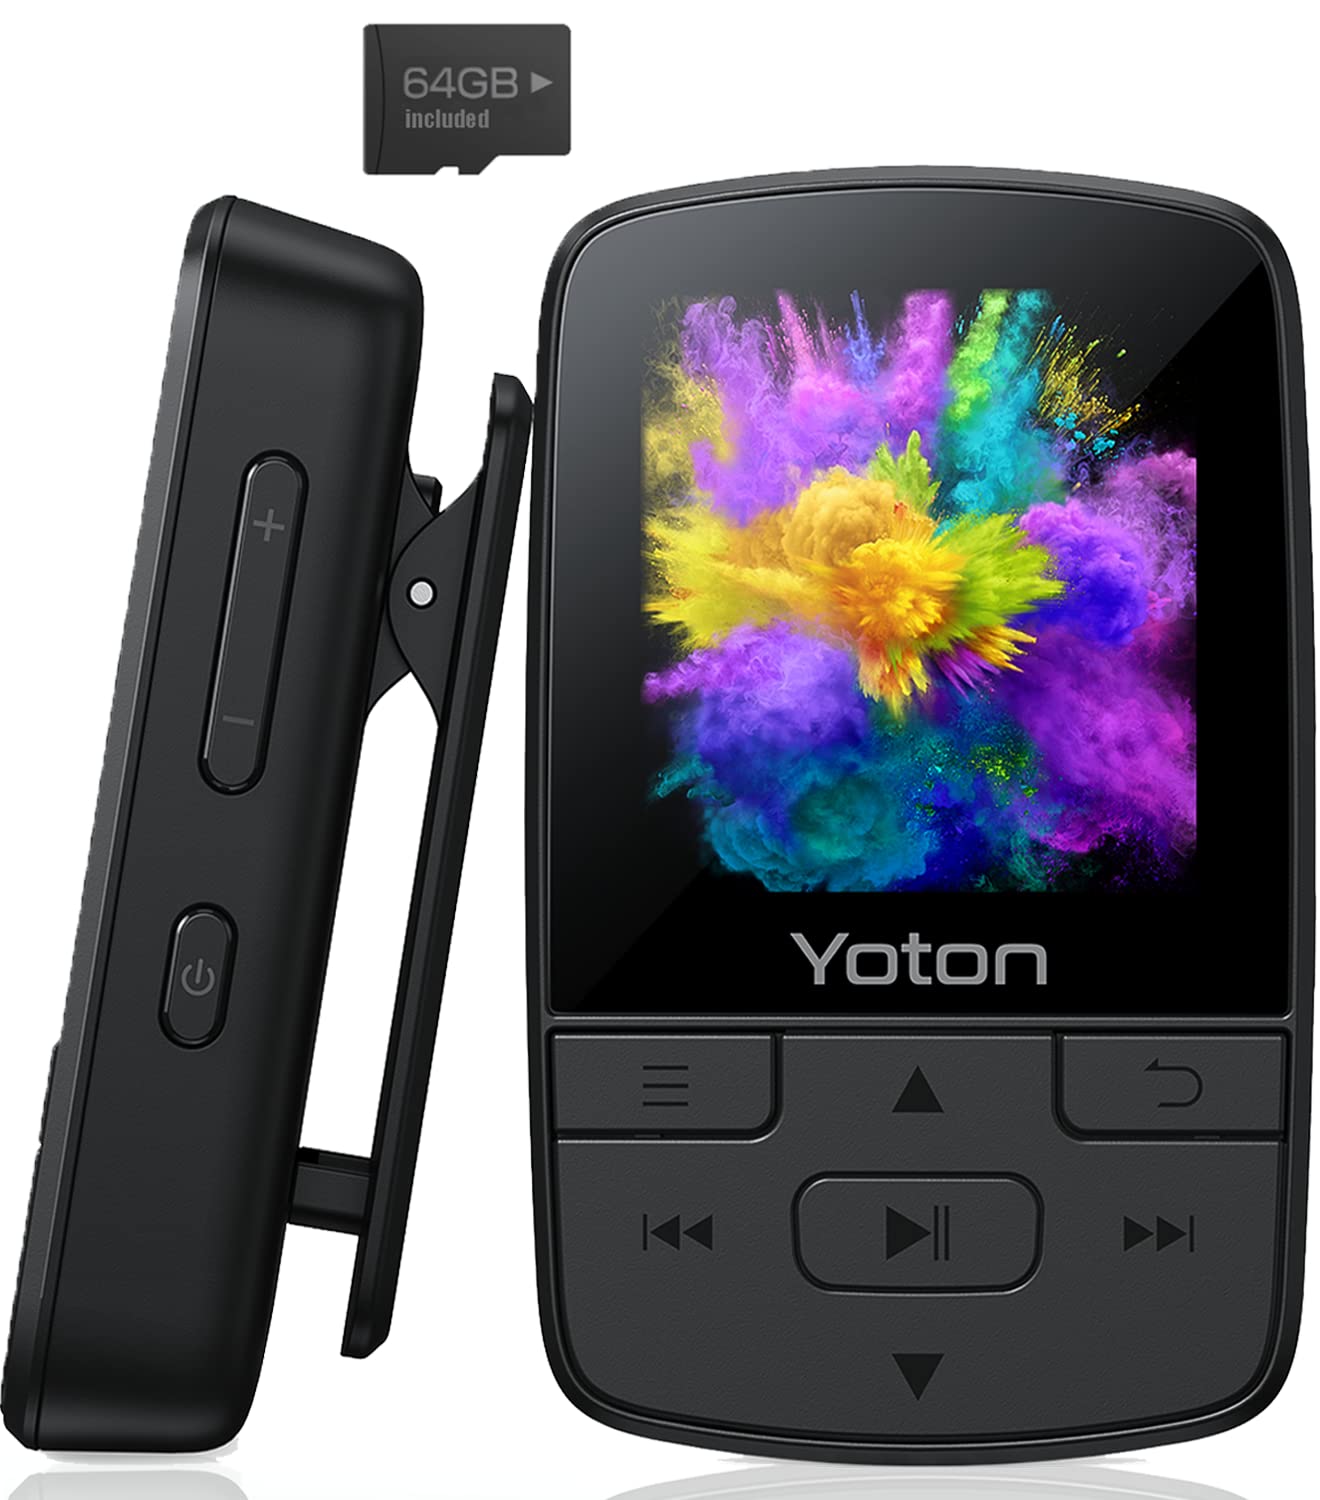 YOTON MP3 Player YM03 Only for US